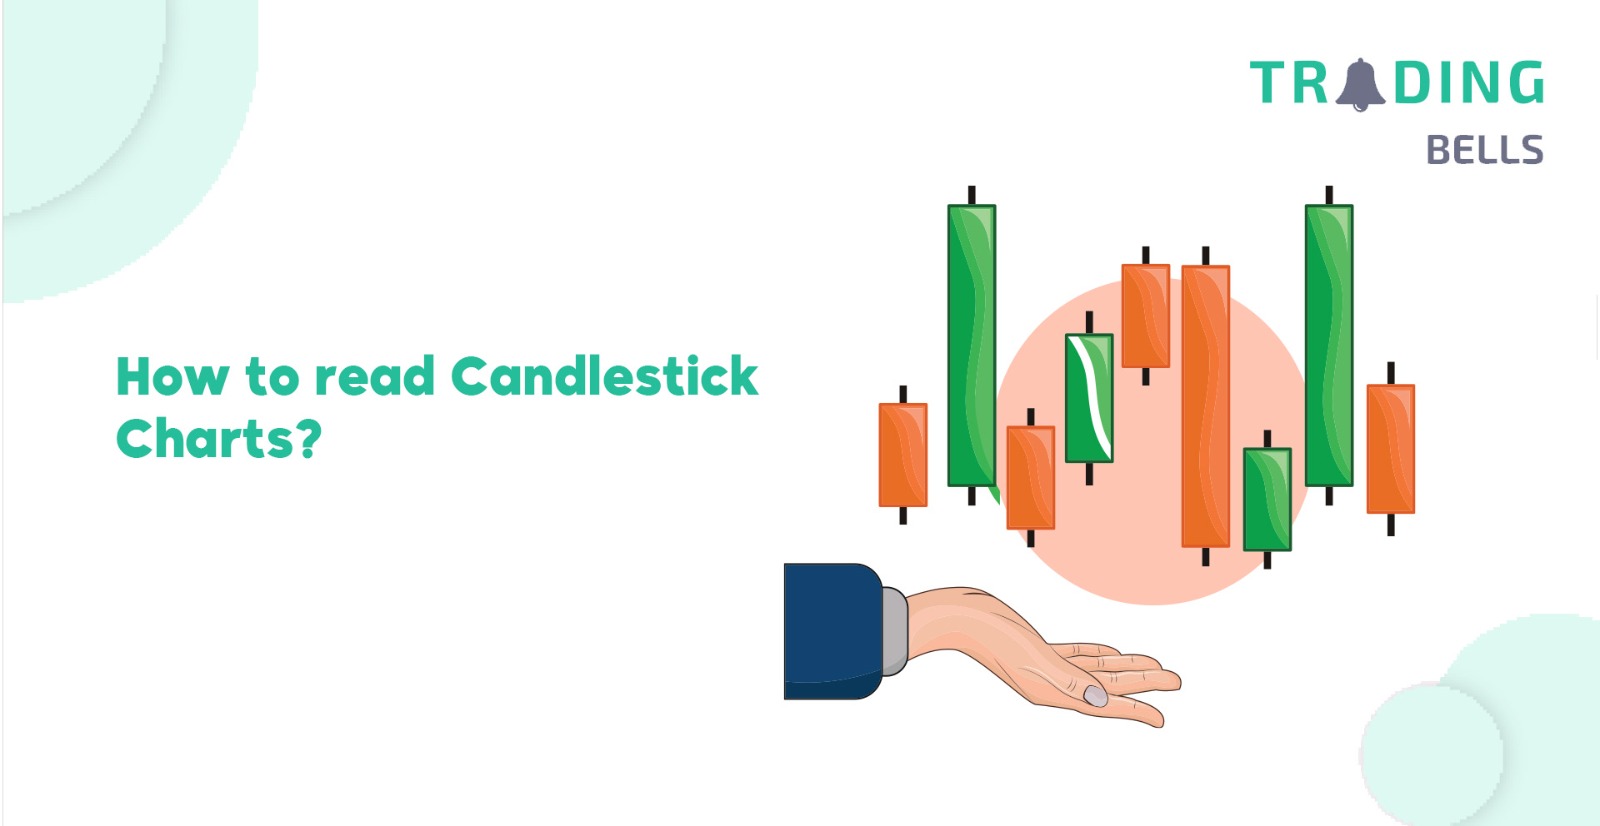 How to read Candlestick Charts